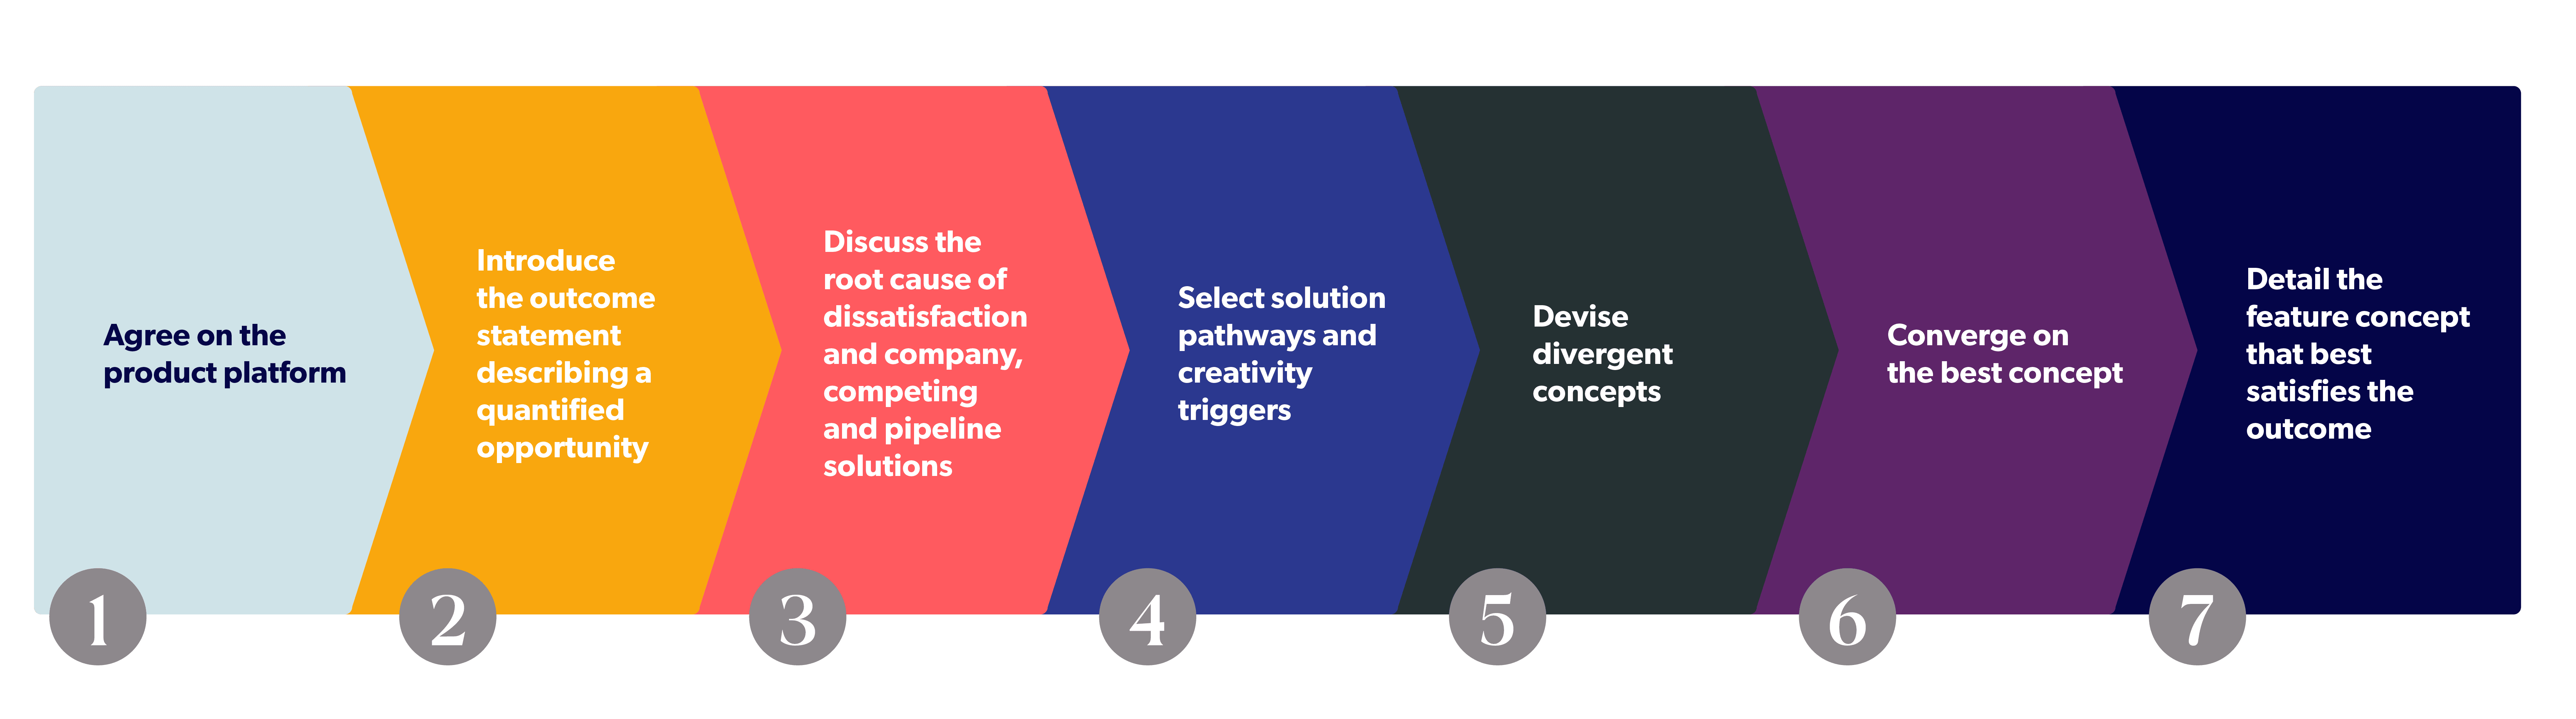 Ideation process flow chart for Strategyn